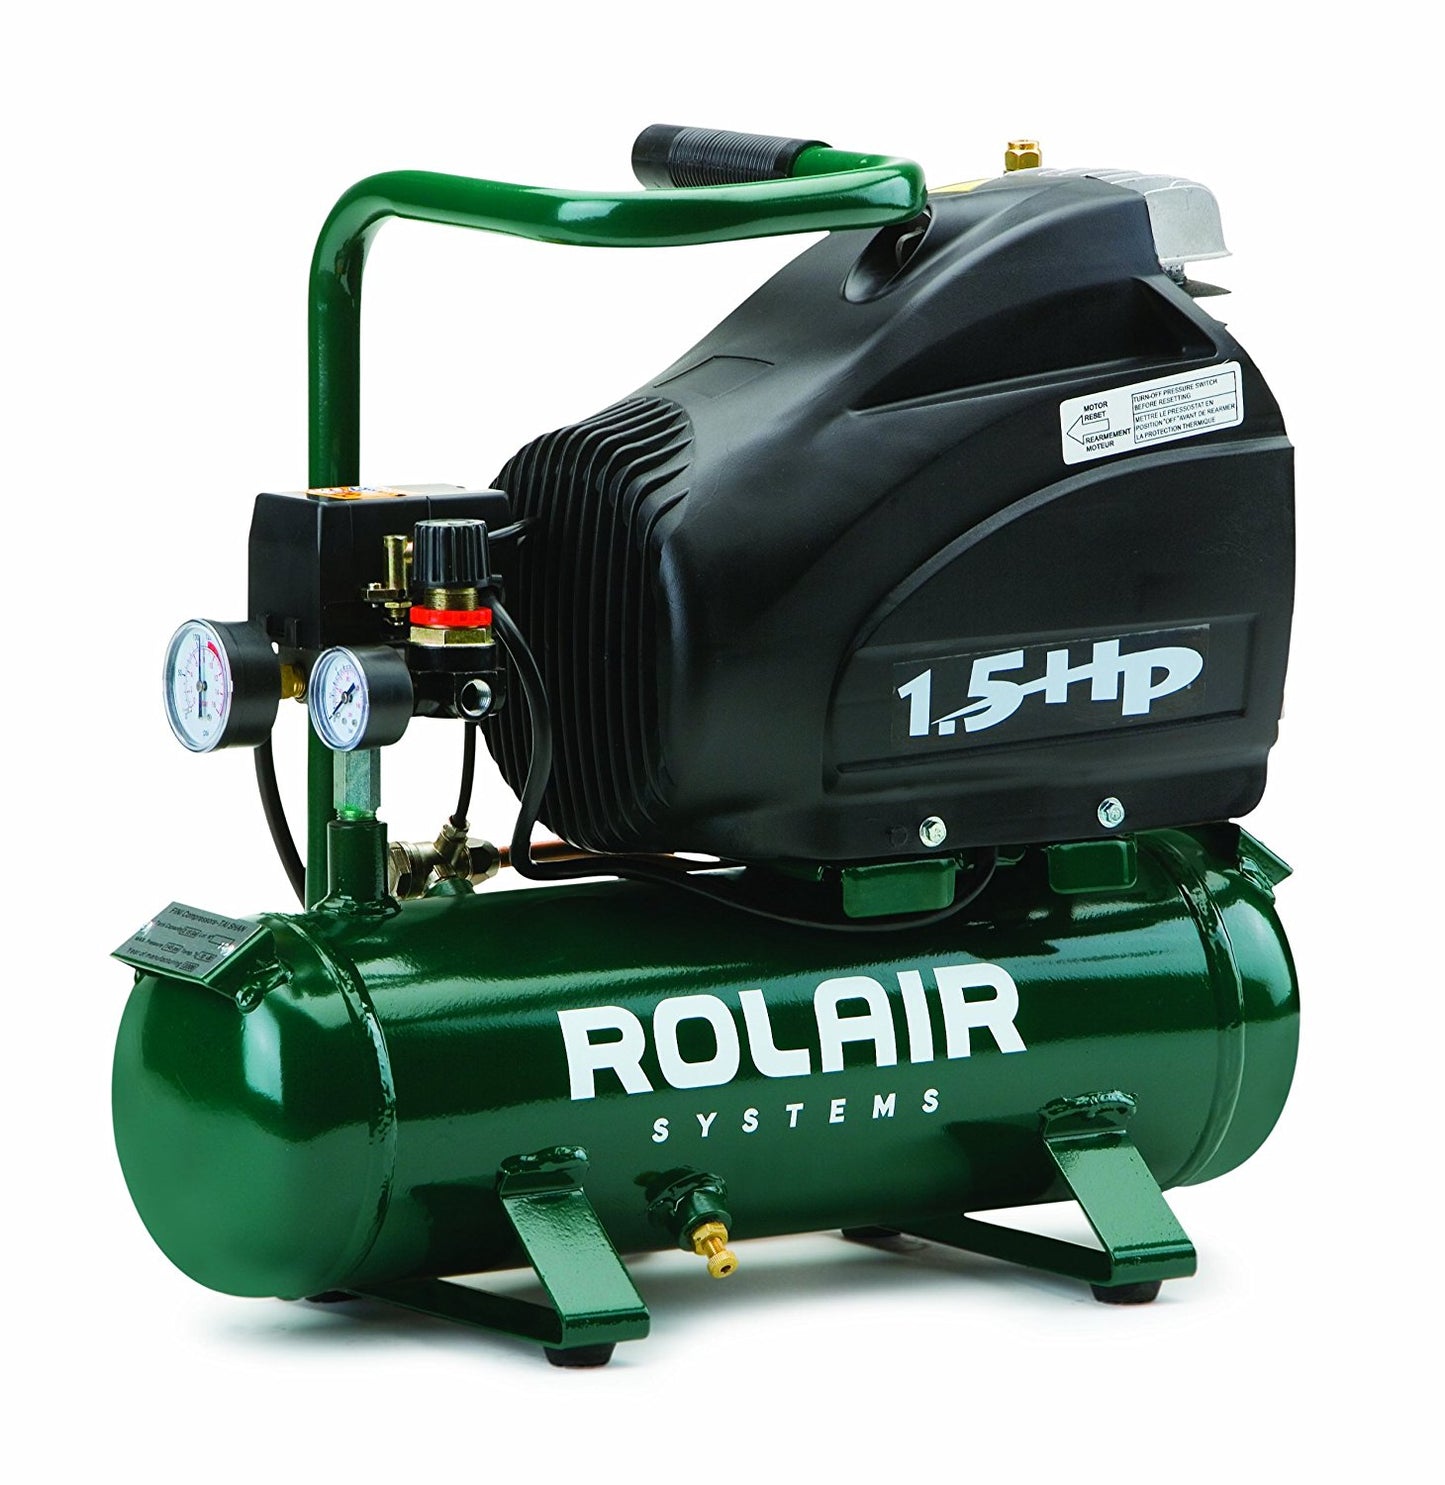 Rolair FC1500HS3 1.5 HP Compressor with Overload Protection and Manual Reset